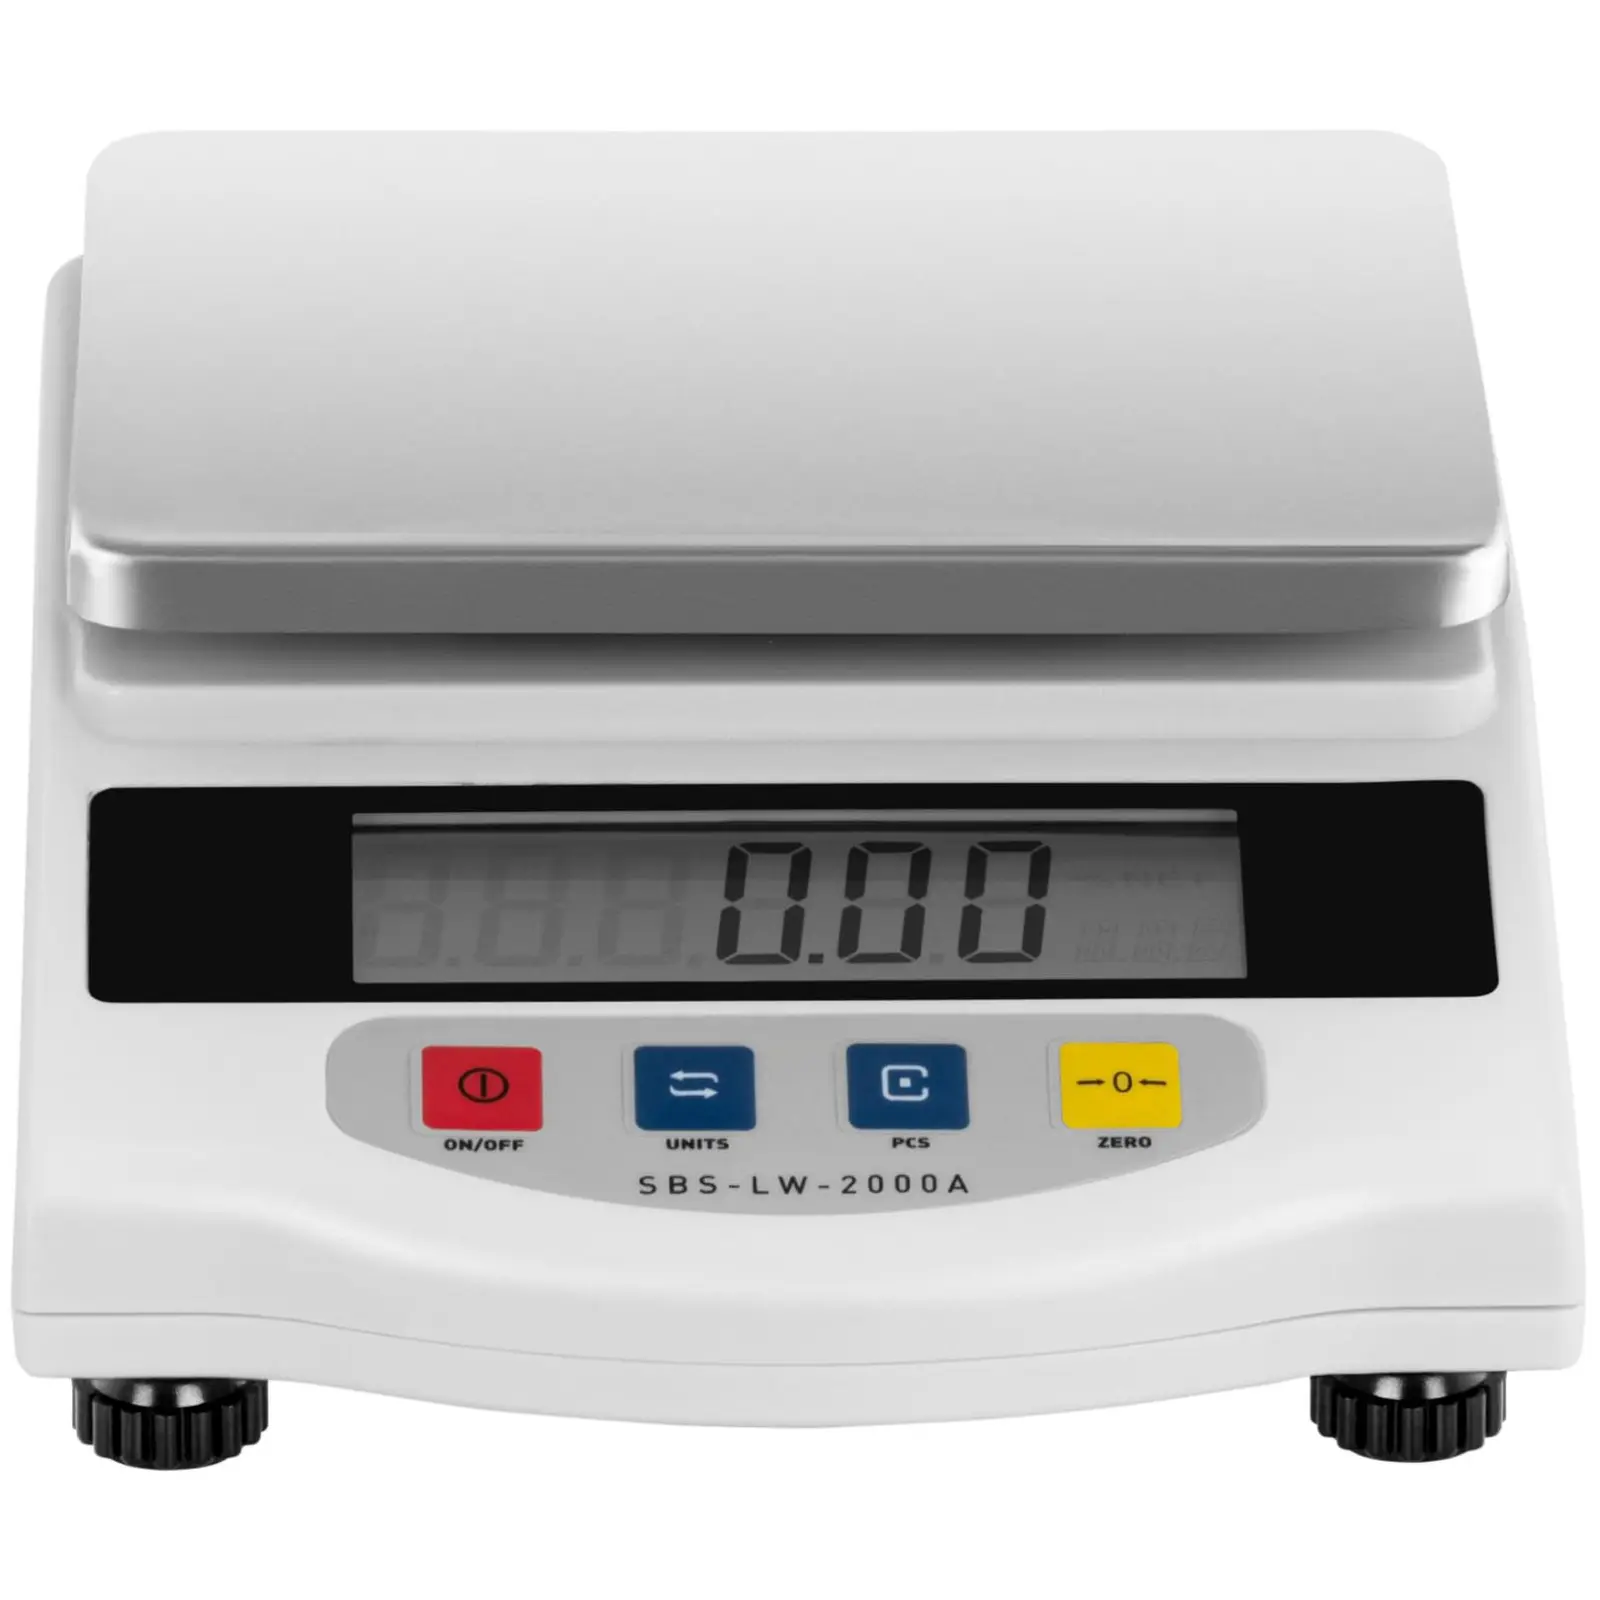 Outlet Waga laboratoryjna - 2000 g / 0,01 g - LCD